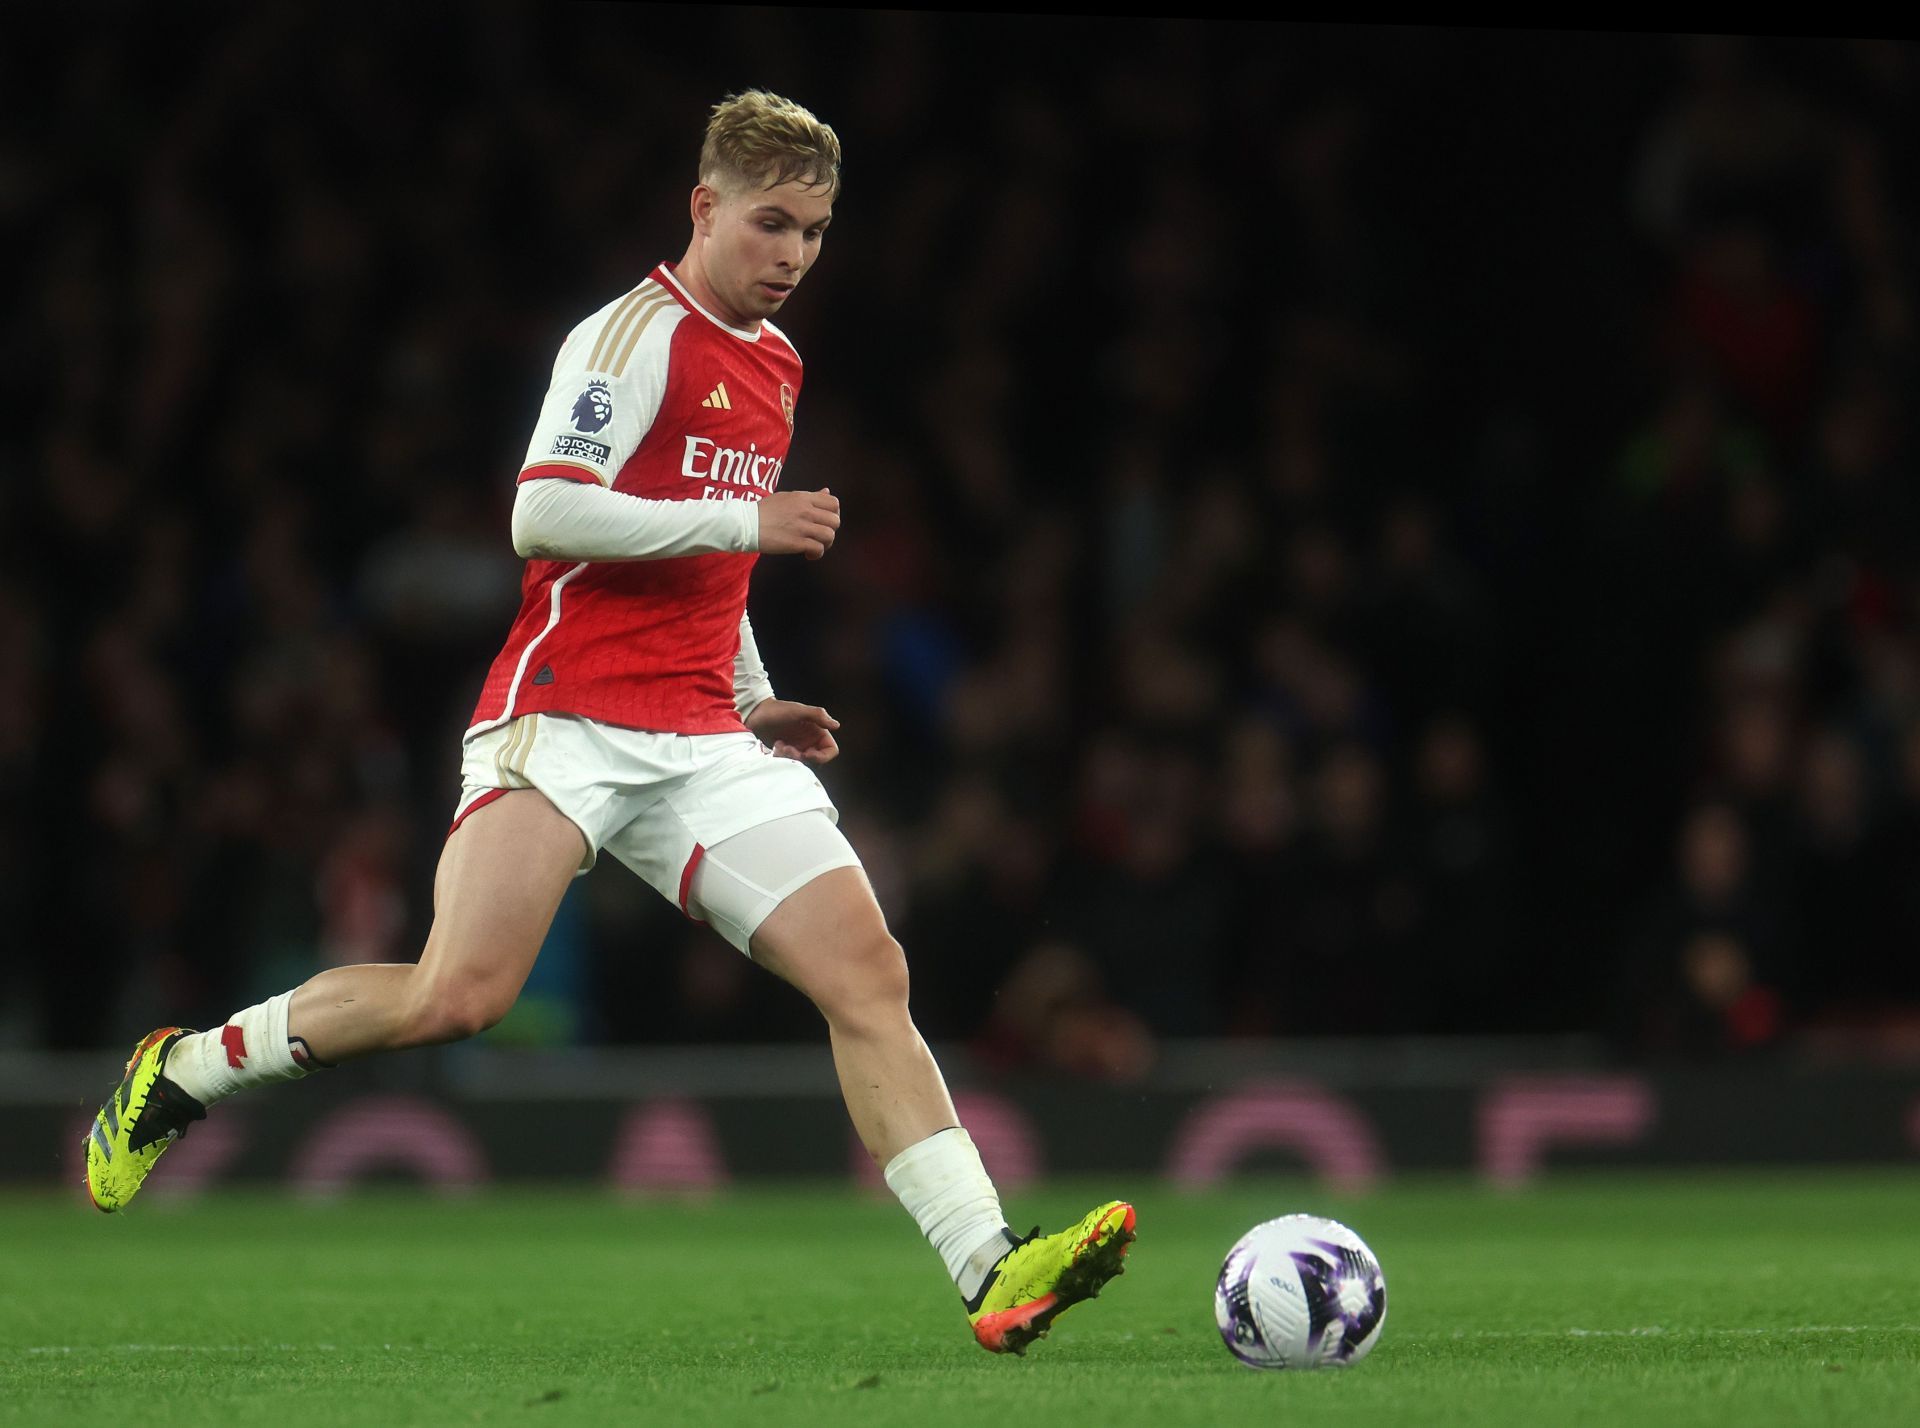 Emile Smith Rowe has struggled for game time this season